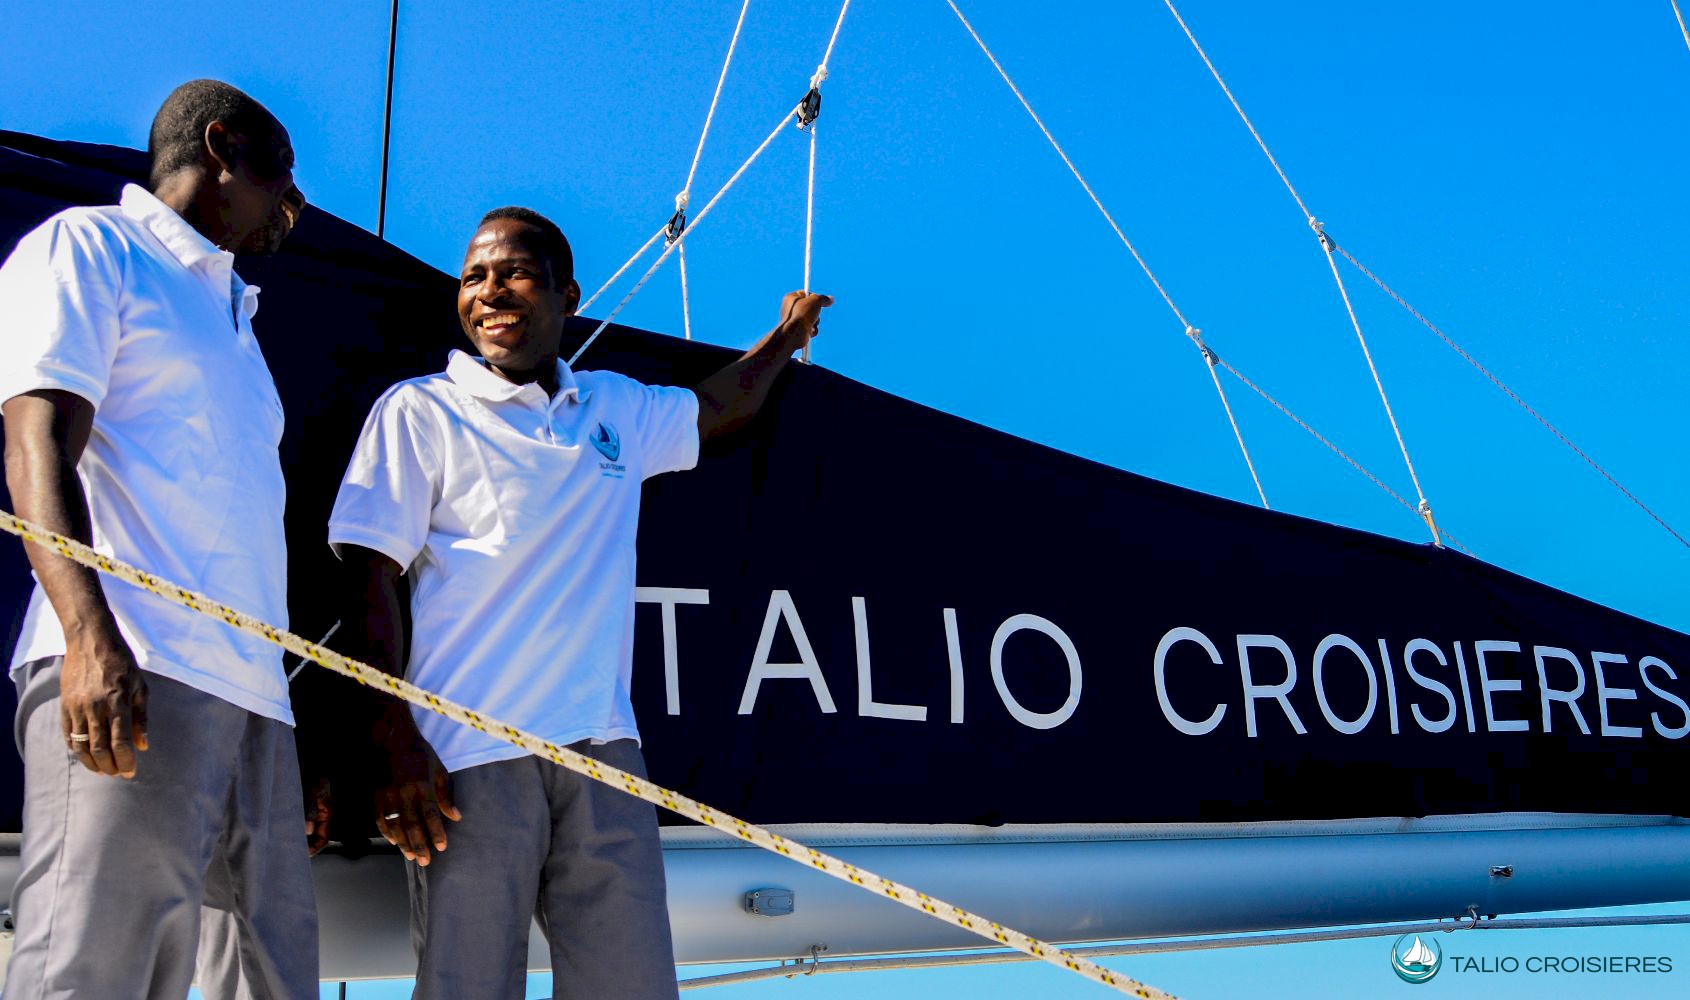 talio-croisiere-equipage.JPG